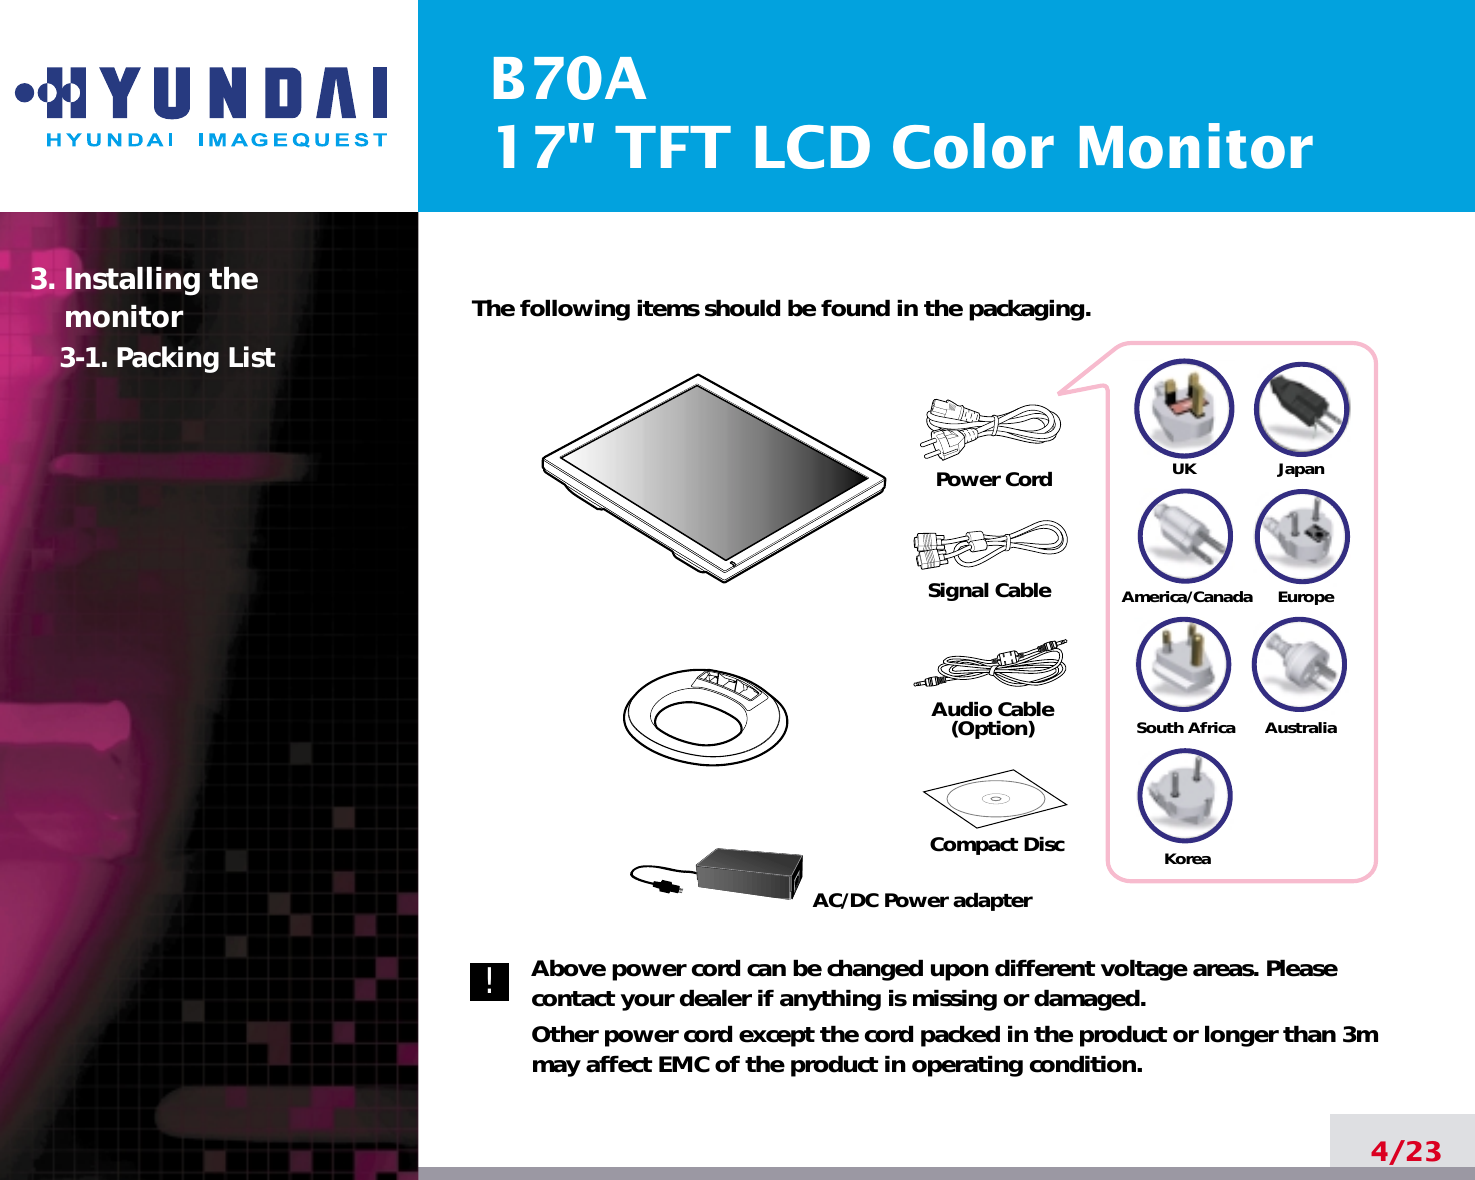 B70A17&quot; TFT LCD Color Monitor4/23The following items should be found in the packaging.Above power cord can be changed upon different voltage areas. Pleasecontact your dealer if anything is missing or damaged.Other power cord except the cord packed in the product or longer than 3mmay affect EMC of the product in operating condition.3. Installing the monitor3-1. Packing List!UKAmerica/CanadaJapanAustraliaKoreaEuropeSouth AfricaPower CordSignal CableAudio Cable(Option)Compact DiscAC/DC Power adapter